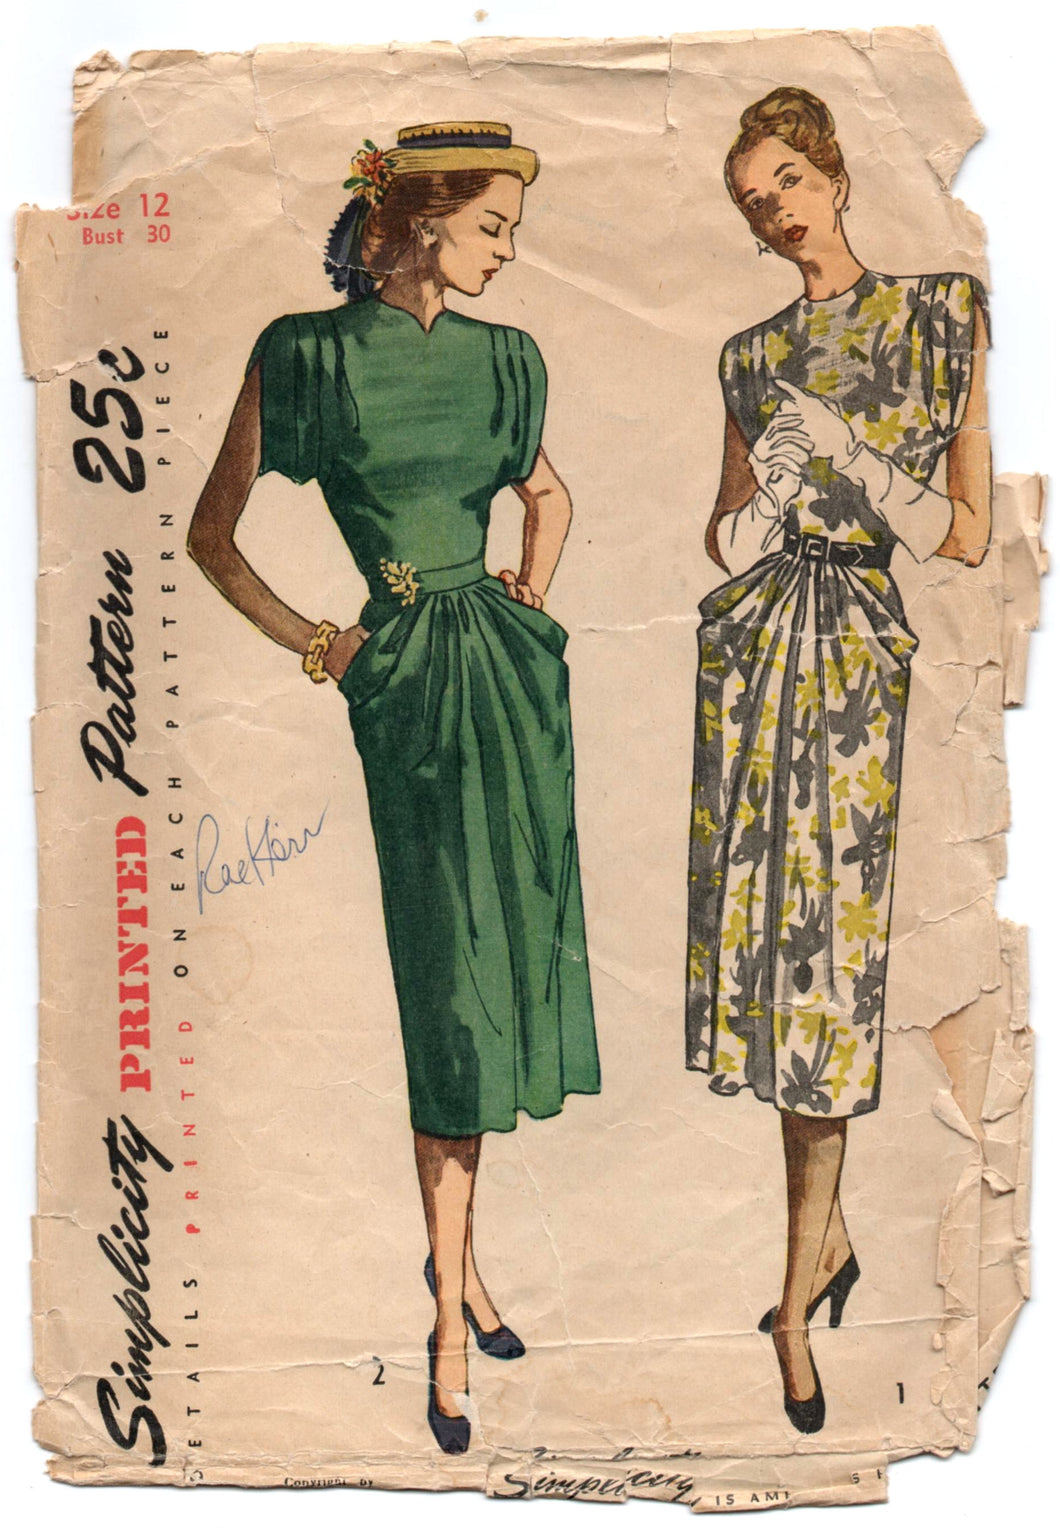 1940's Simplicity One Piece Dress Pattern with pockets and flowing sleeves and gathered front - Bust 30